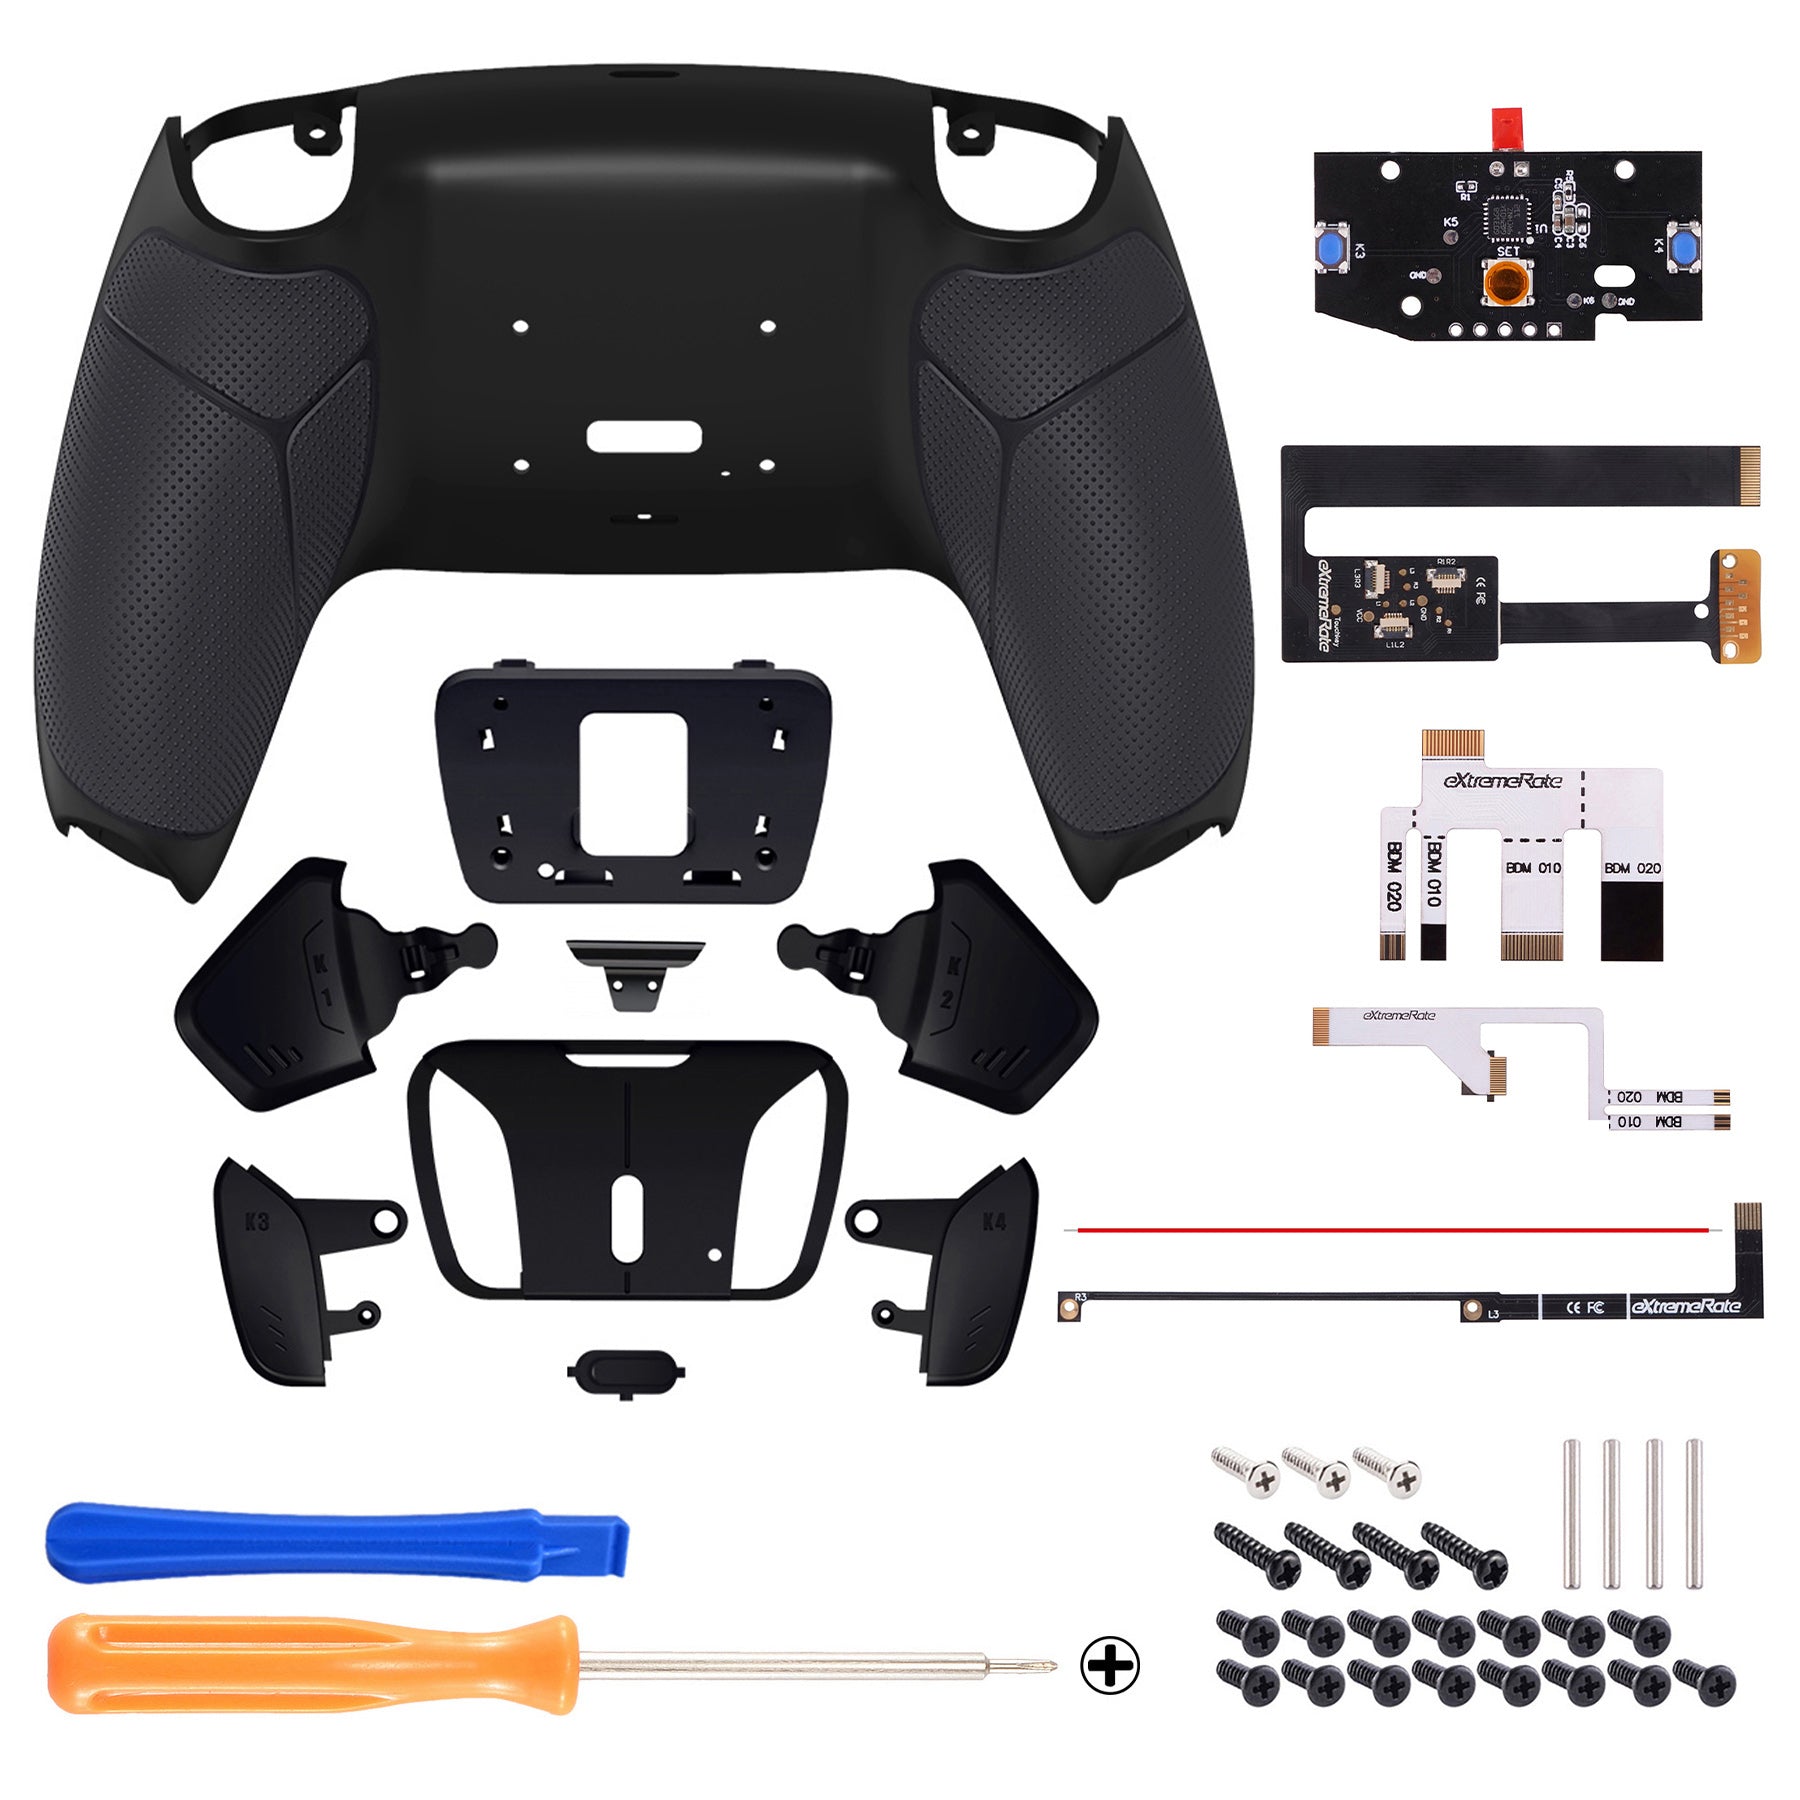 eXtremeRate Remappable RISE 4.0 Remap Kit for PS5 Controller BDM-010/020 - Rubberized Black eXtremeRate